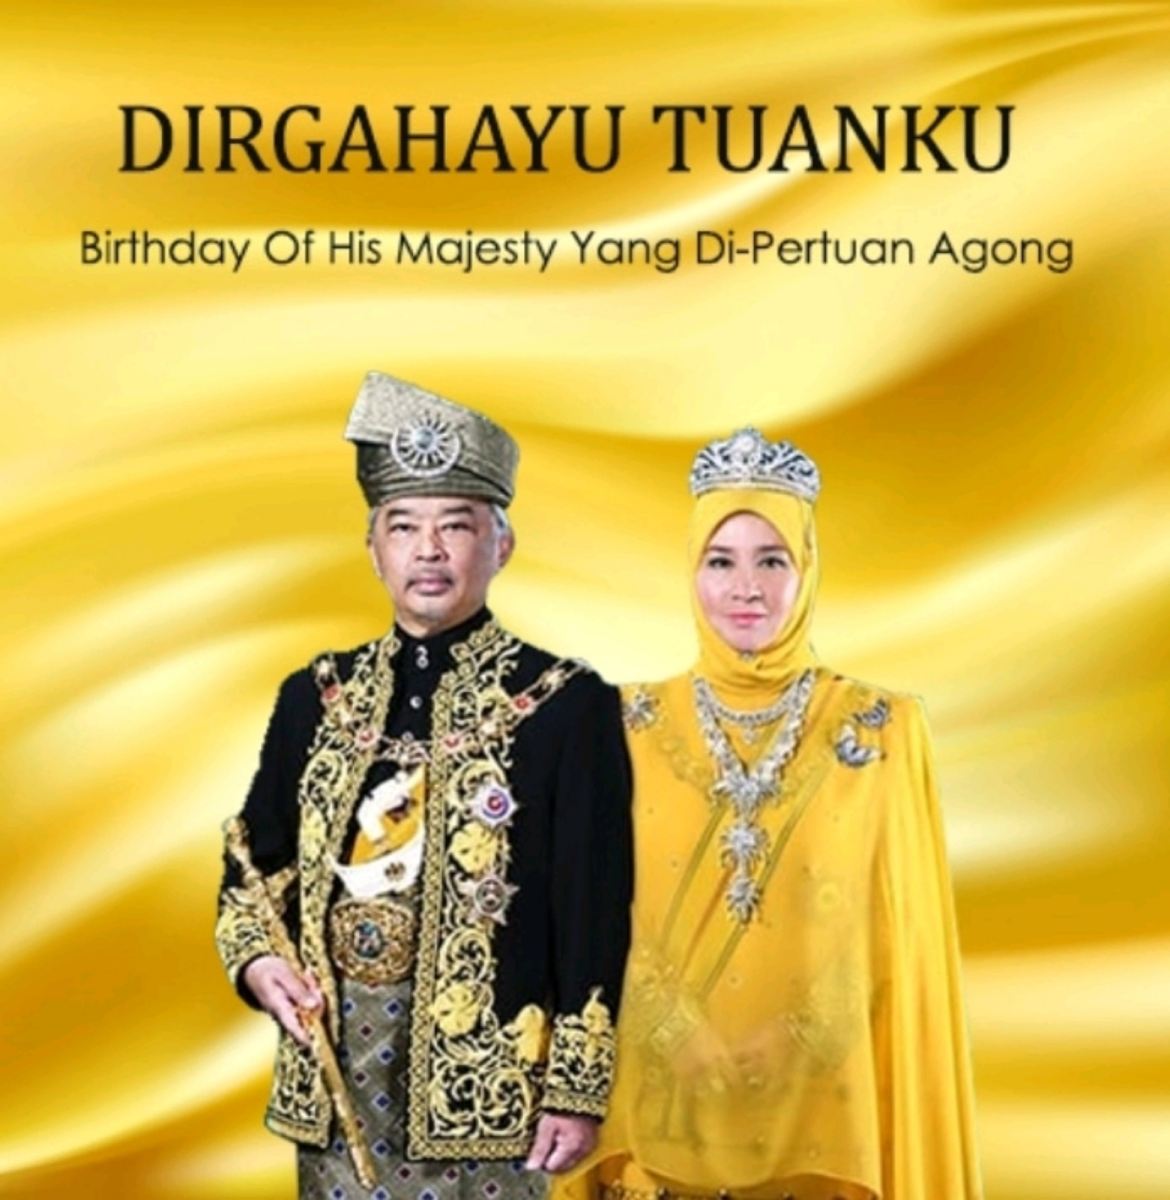 Our heartiest congratulations to His Majesty, Yang di-Pertuan Agong XVI on the occasion of His Majesty's birthday. Wishing His Majesty an abundance of health and many happy returns of the day.